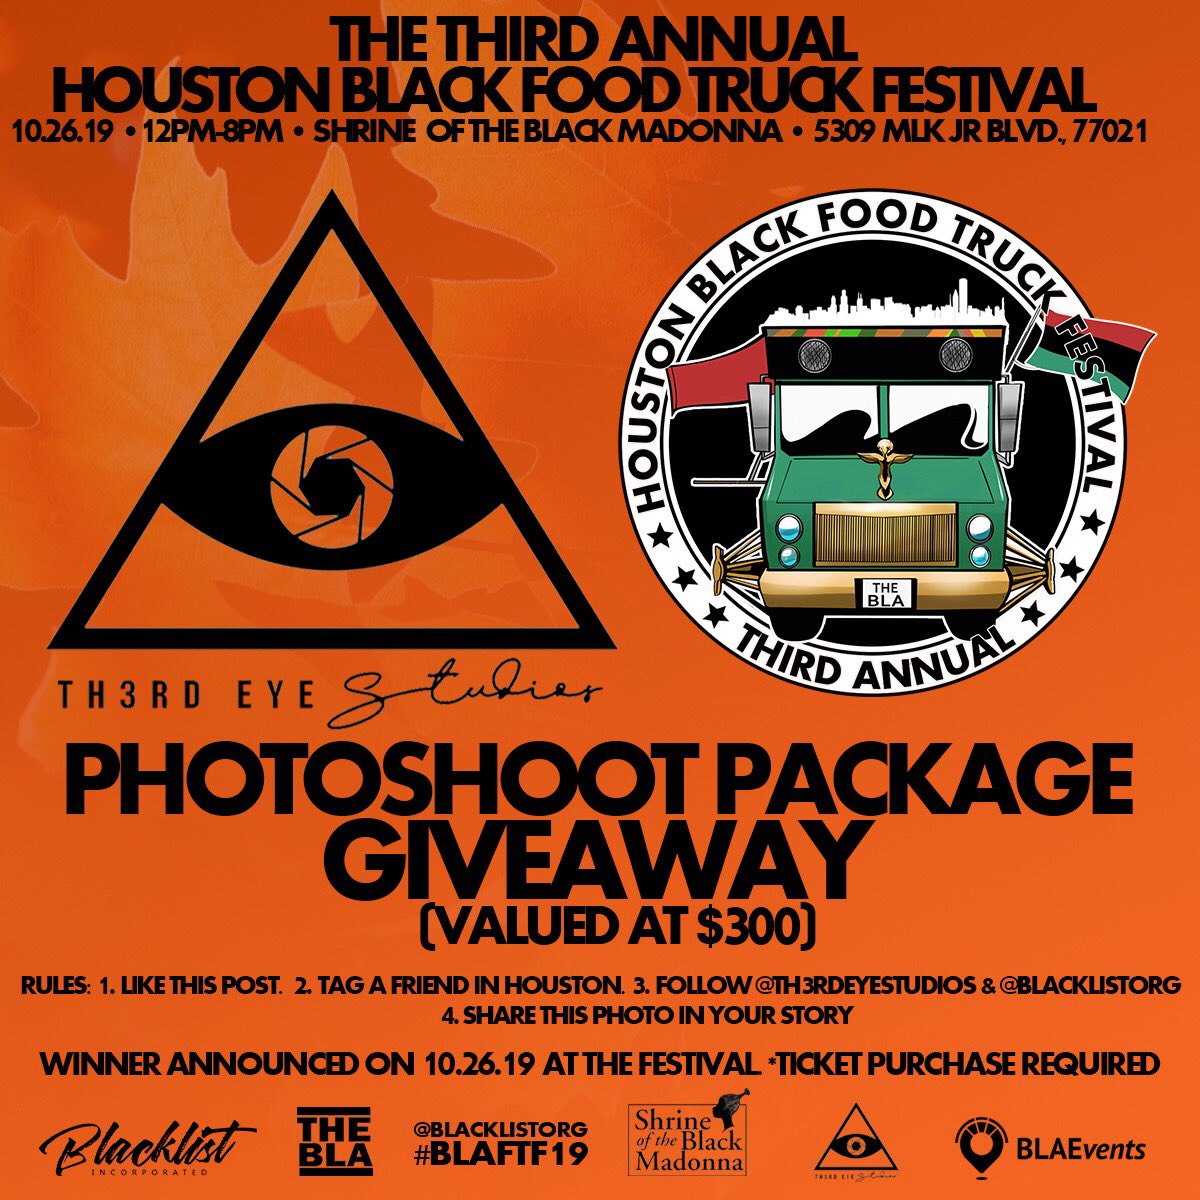 🚨💥ISSA GIVEAWAY💥🚨 In honor of the Third Annual Houston Black Food Truck Festival @th3rdeyestudios 👁 is giving away a photoshoot package valued at $300 to one of our followers!! 📷 Head over to our Instagram page for the contest rules: ✅